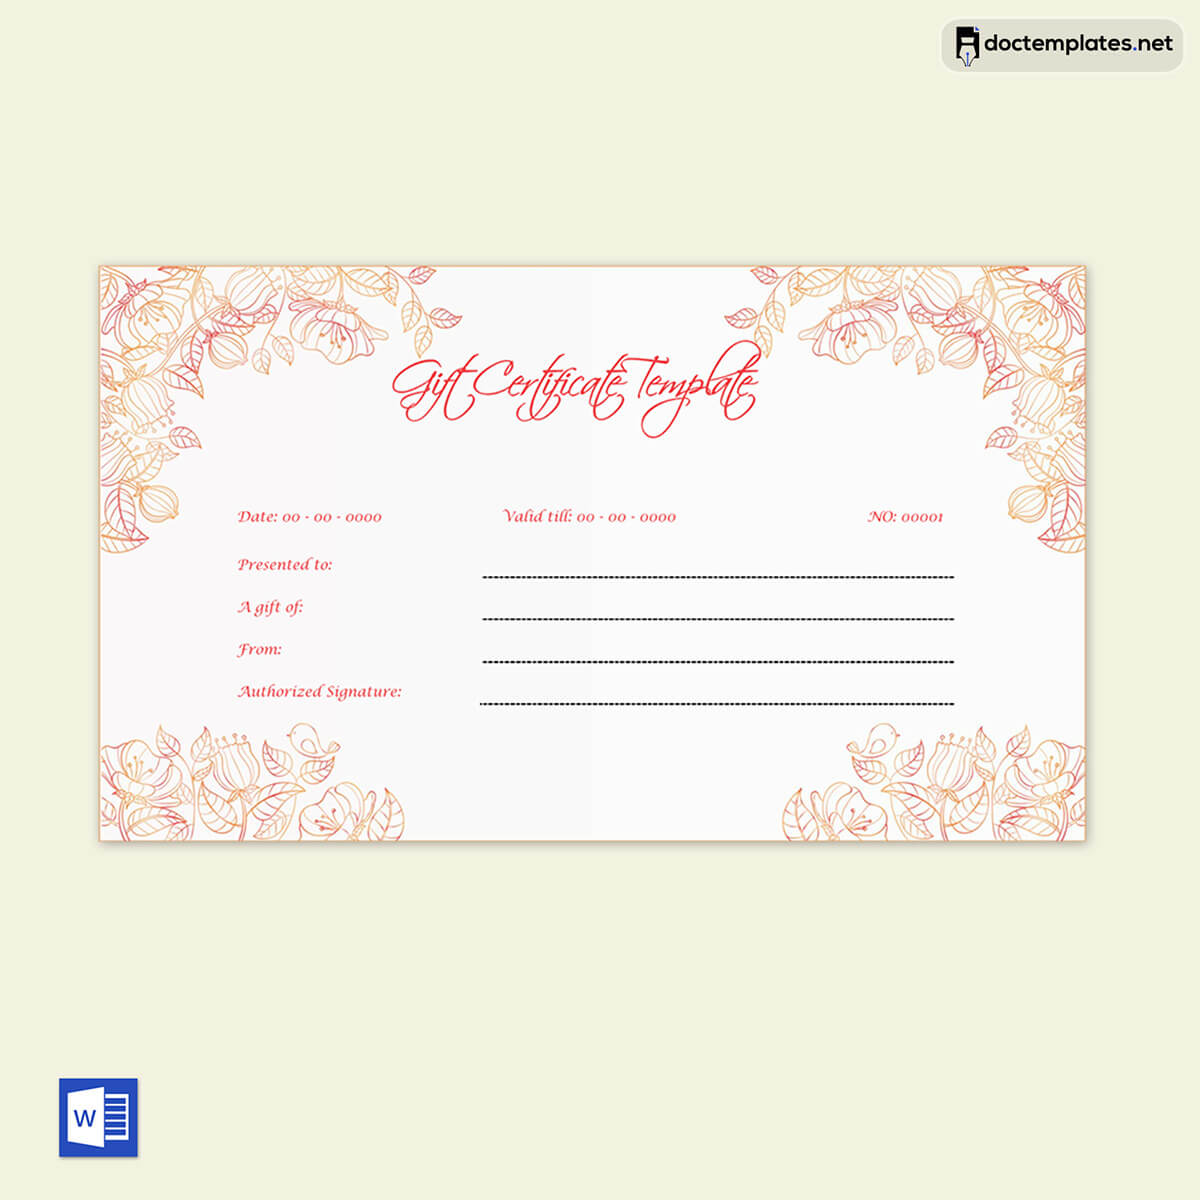 Gift Certificate Template Free Download